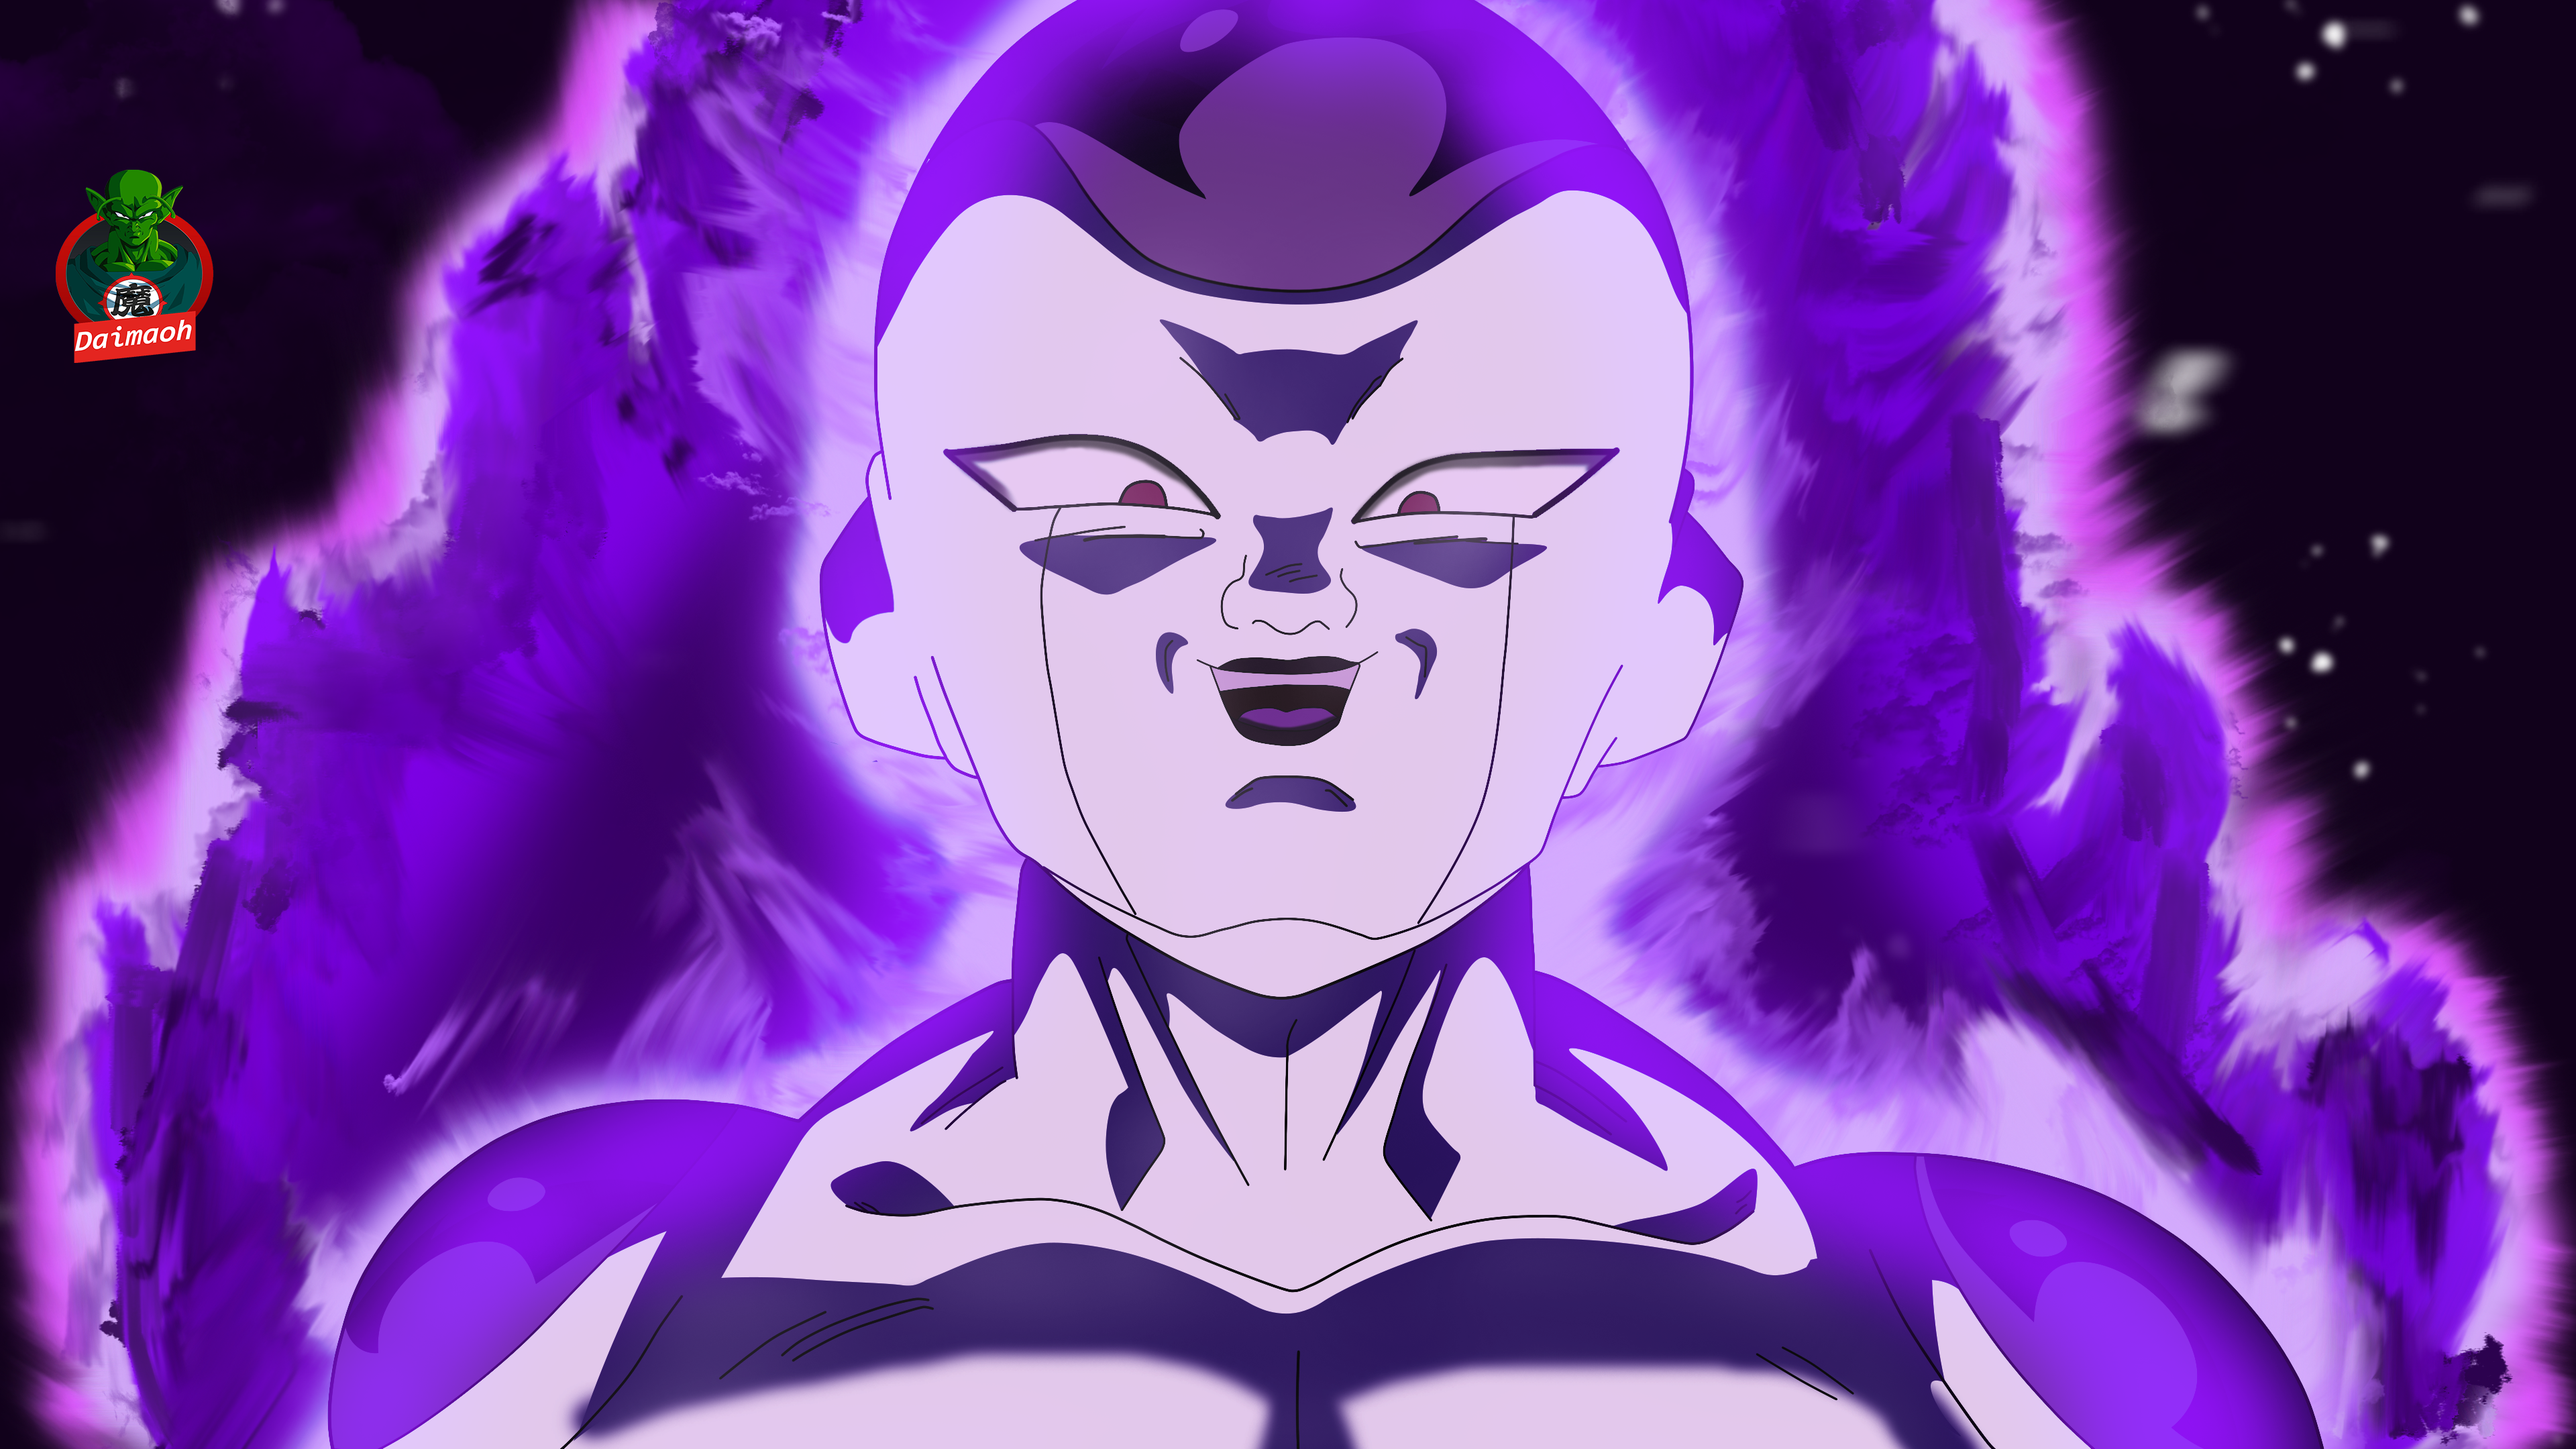 Frieza, the iconic villain from 